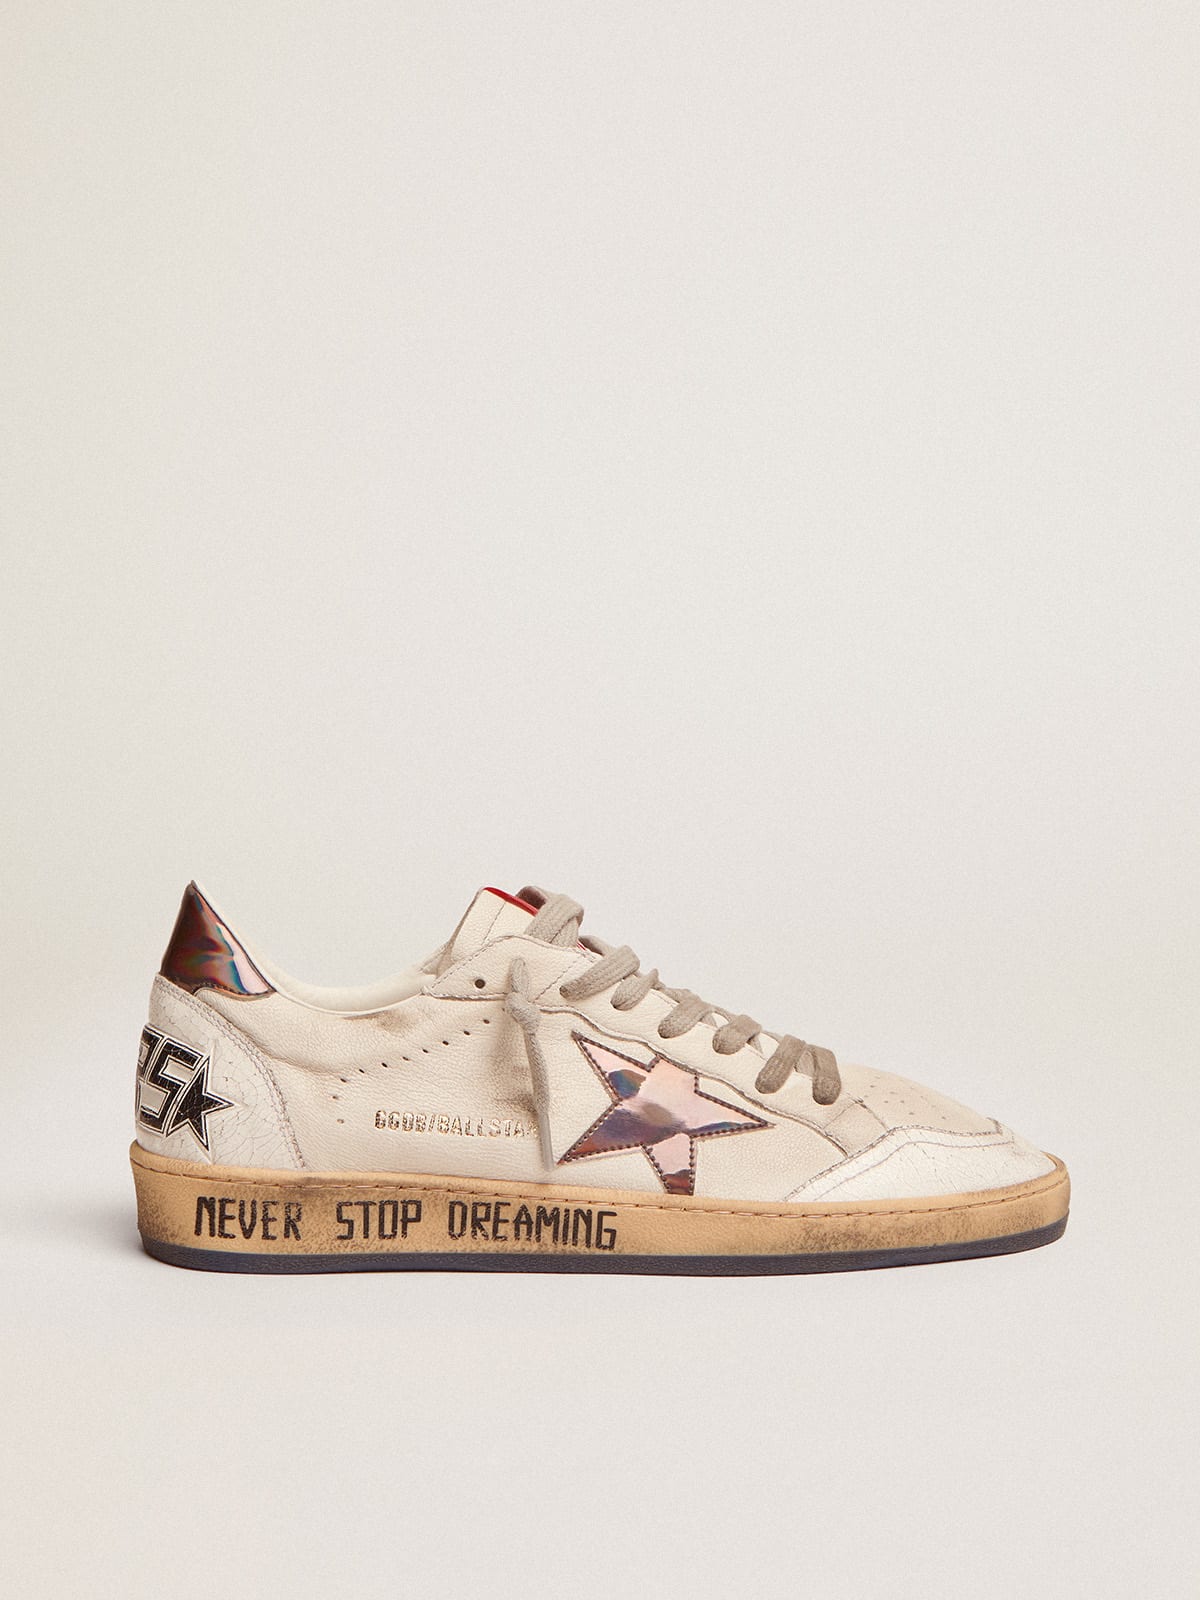 Ball Star sneakers in nappa leather with holographic inserts and lettering on the sole